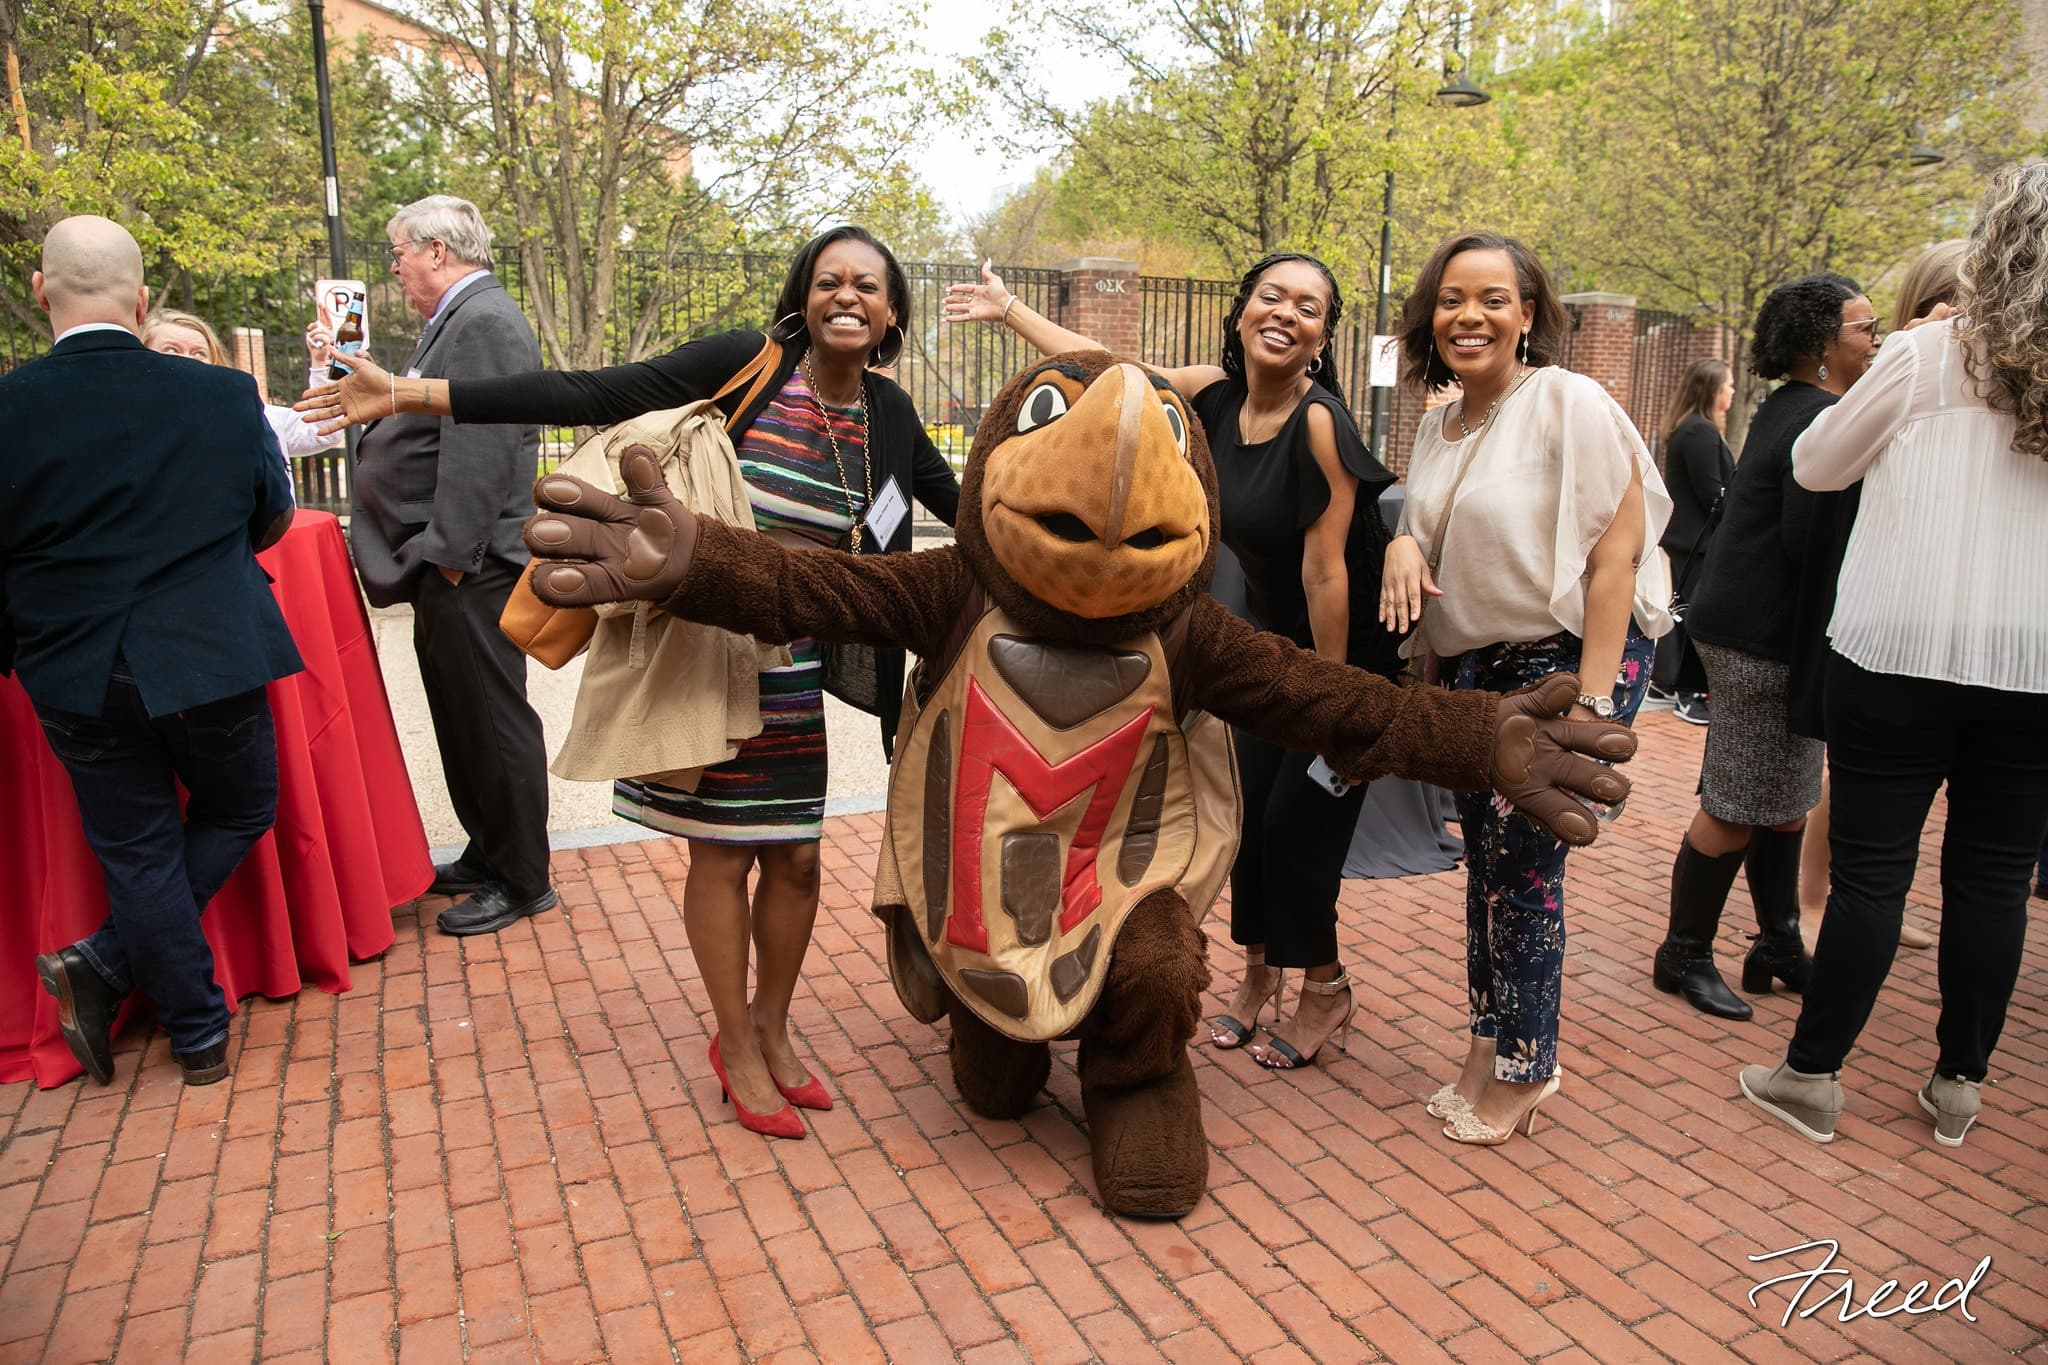 An image of three women standing and smiling with Testudo.